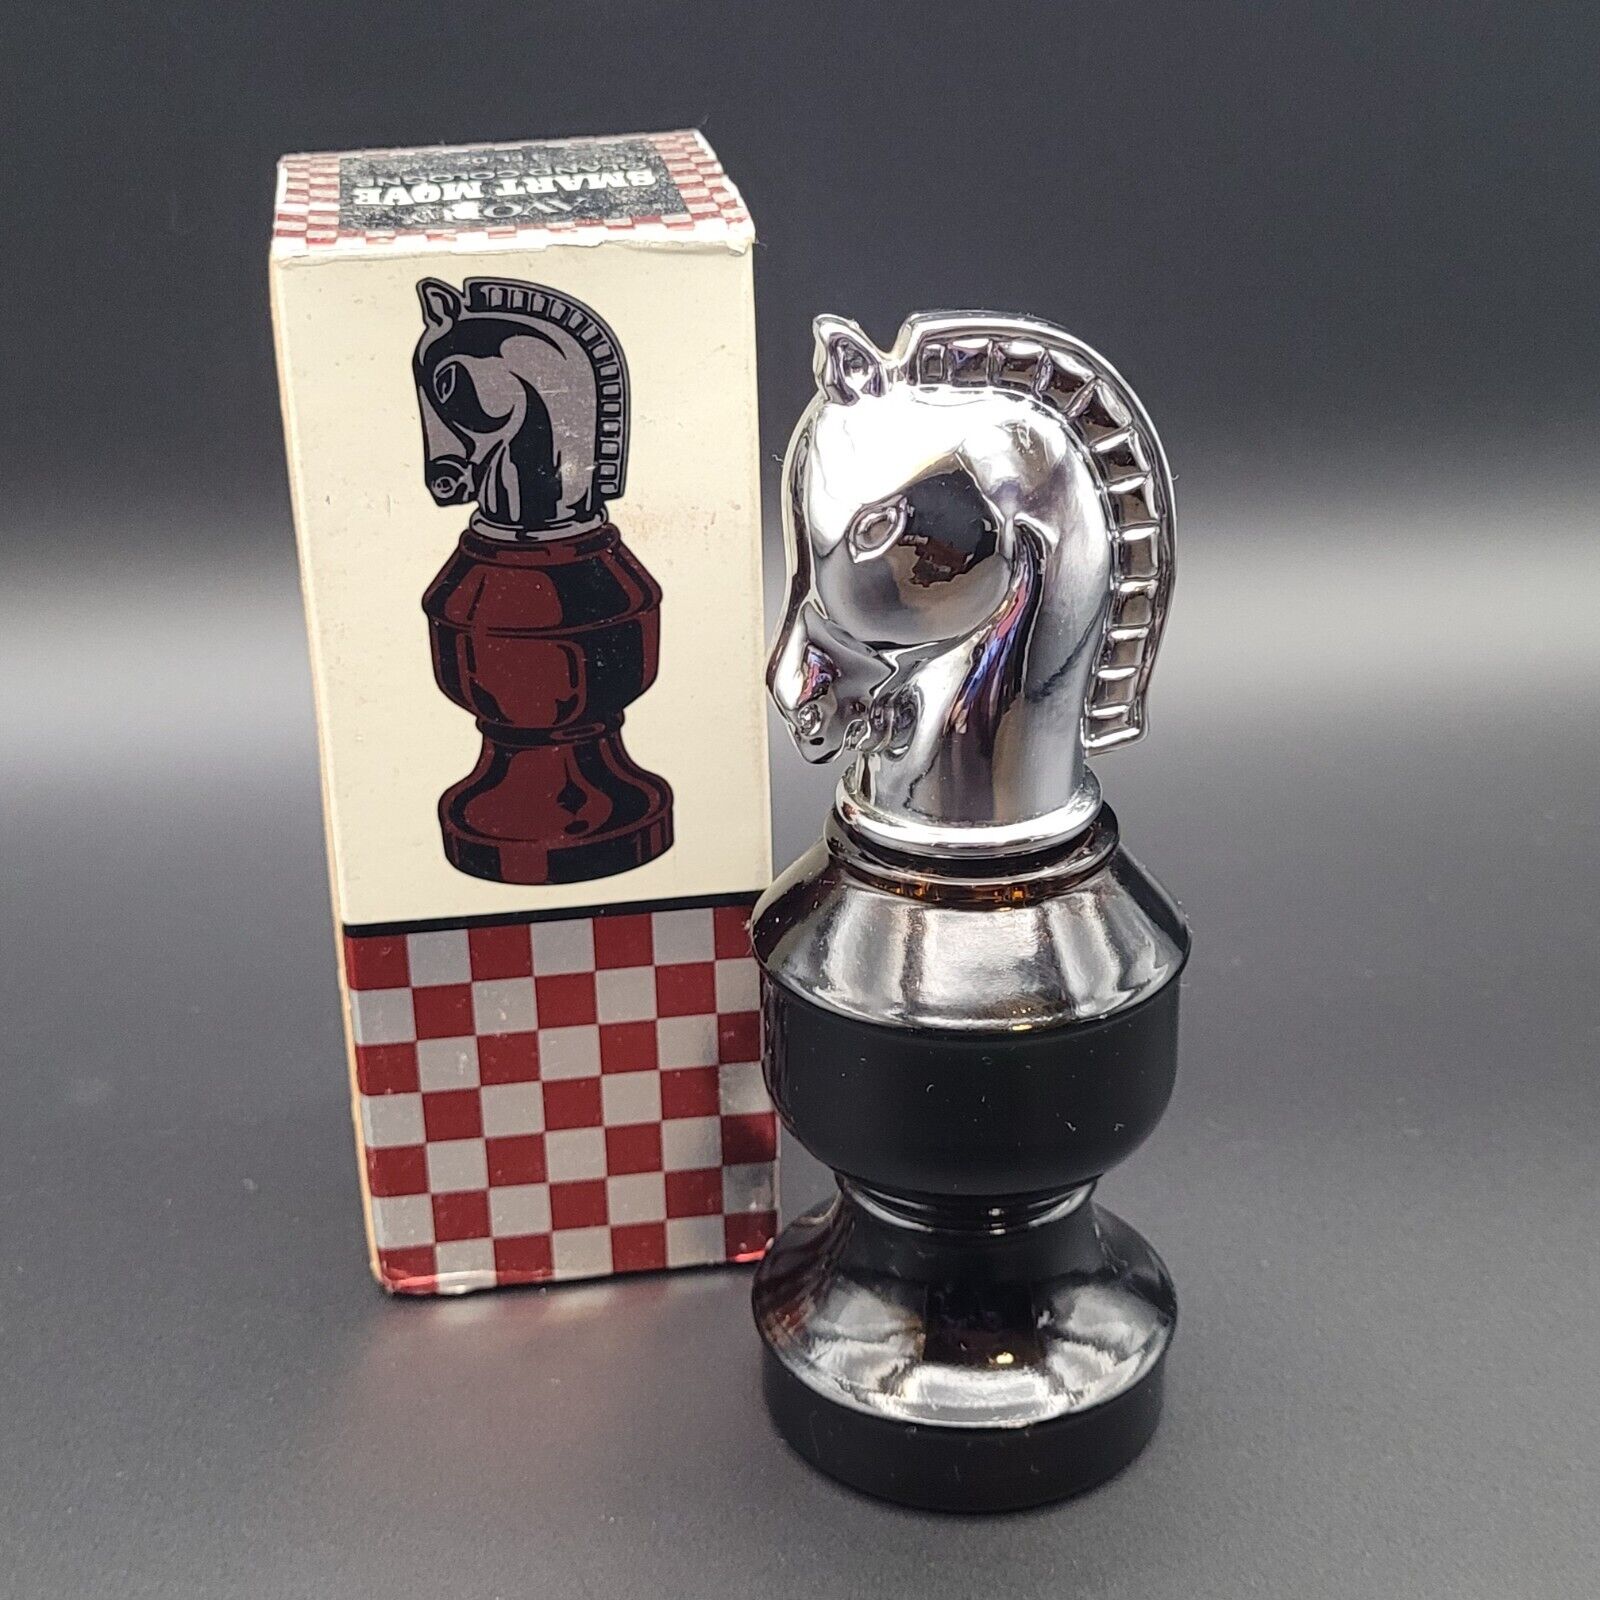 Avon Smart Move Tribute Cologne Knight Chess Piece Vintage Full with Box